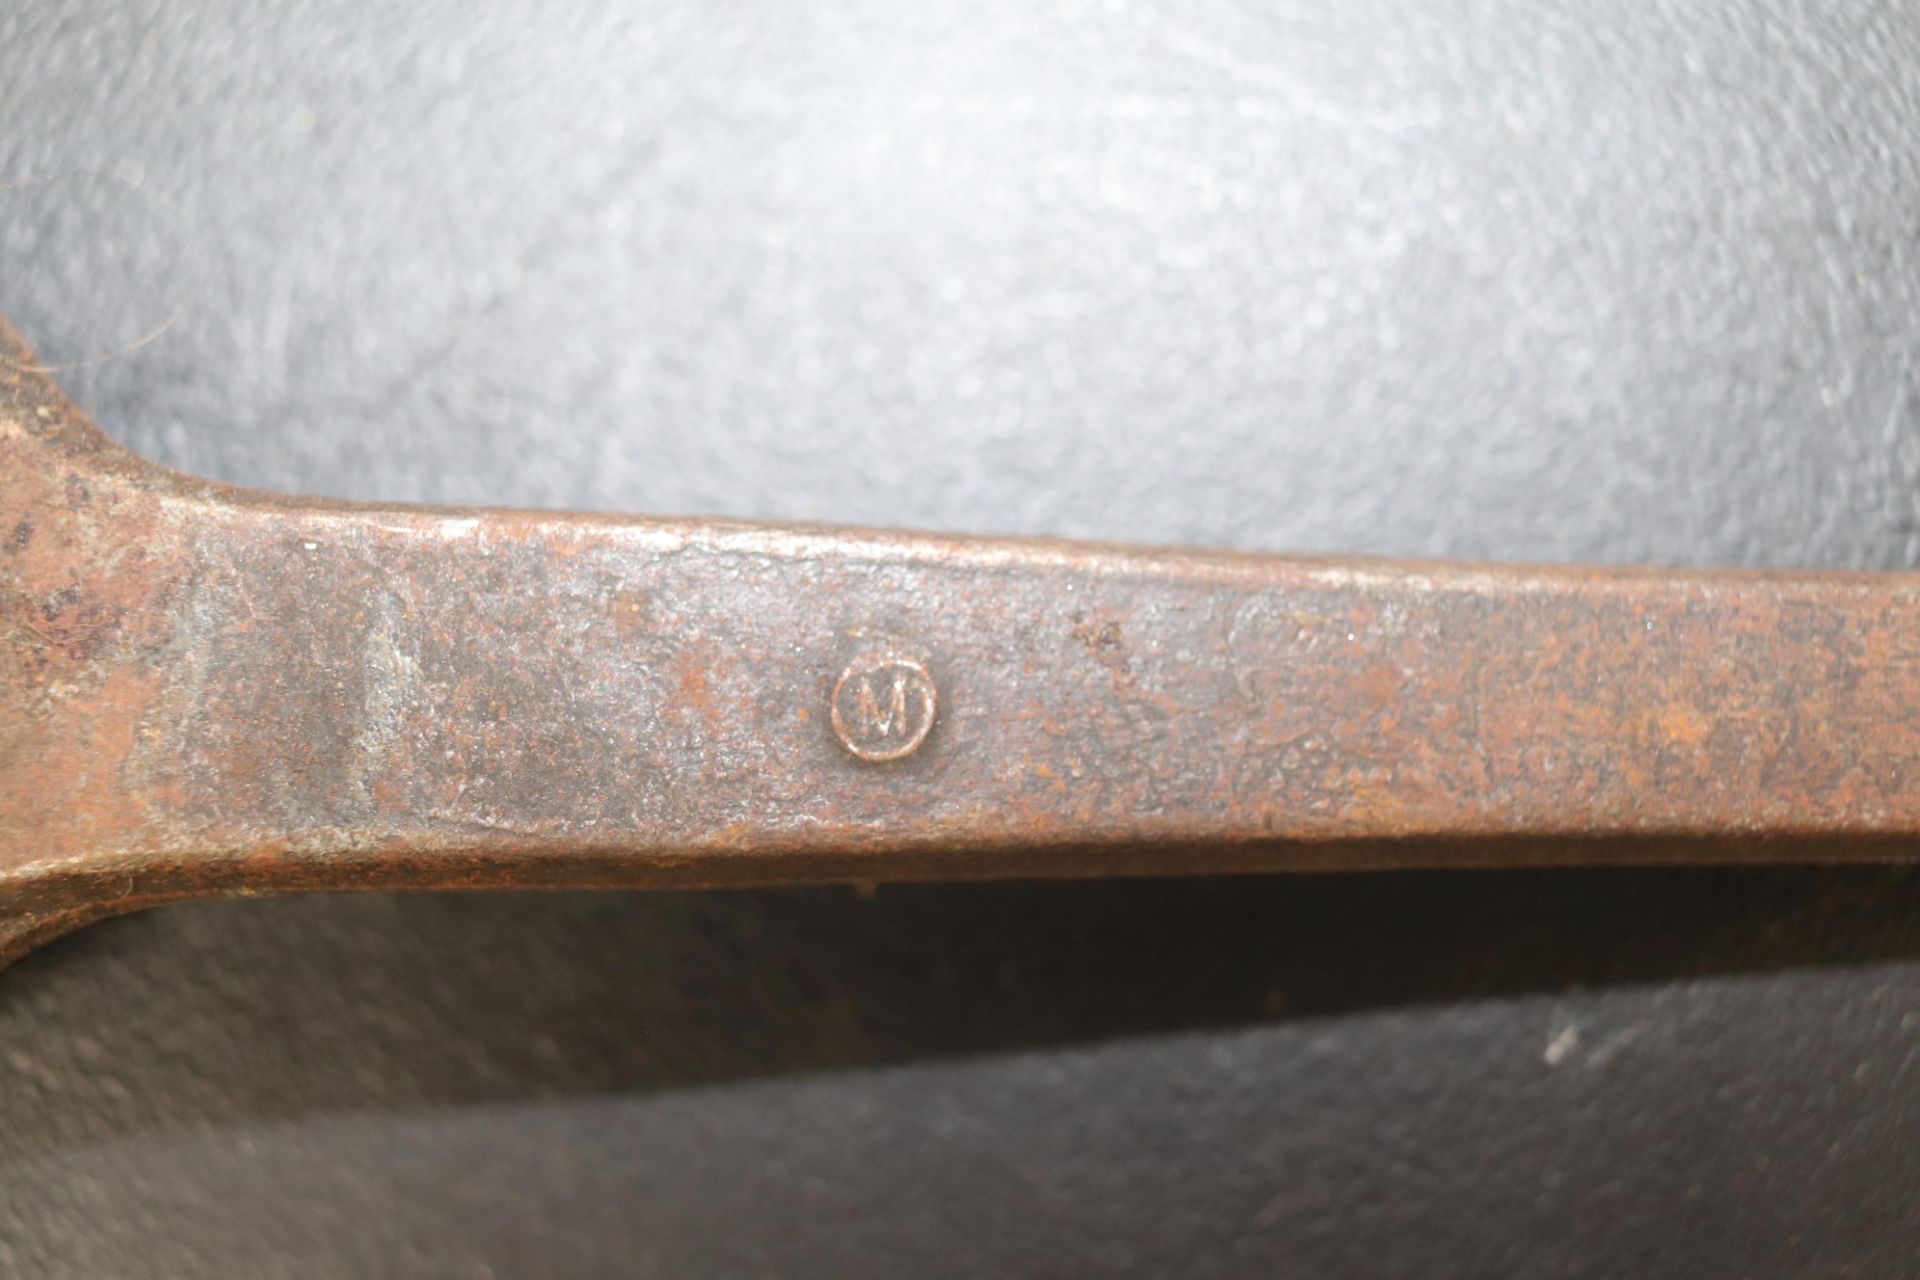 Ford Model T wrench - Image 5 of 6